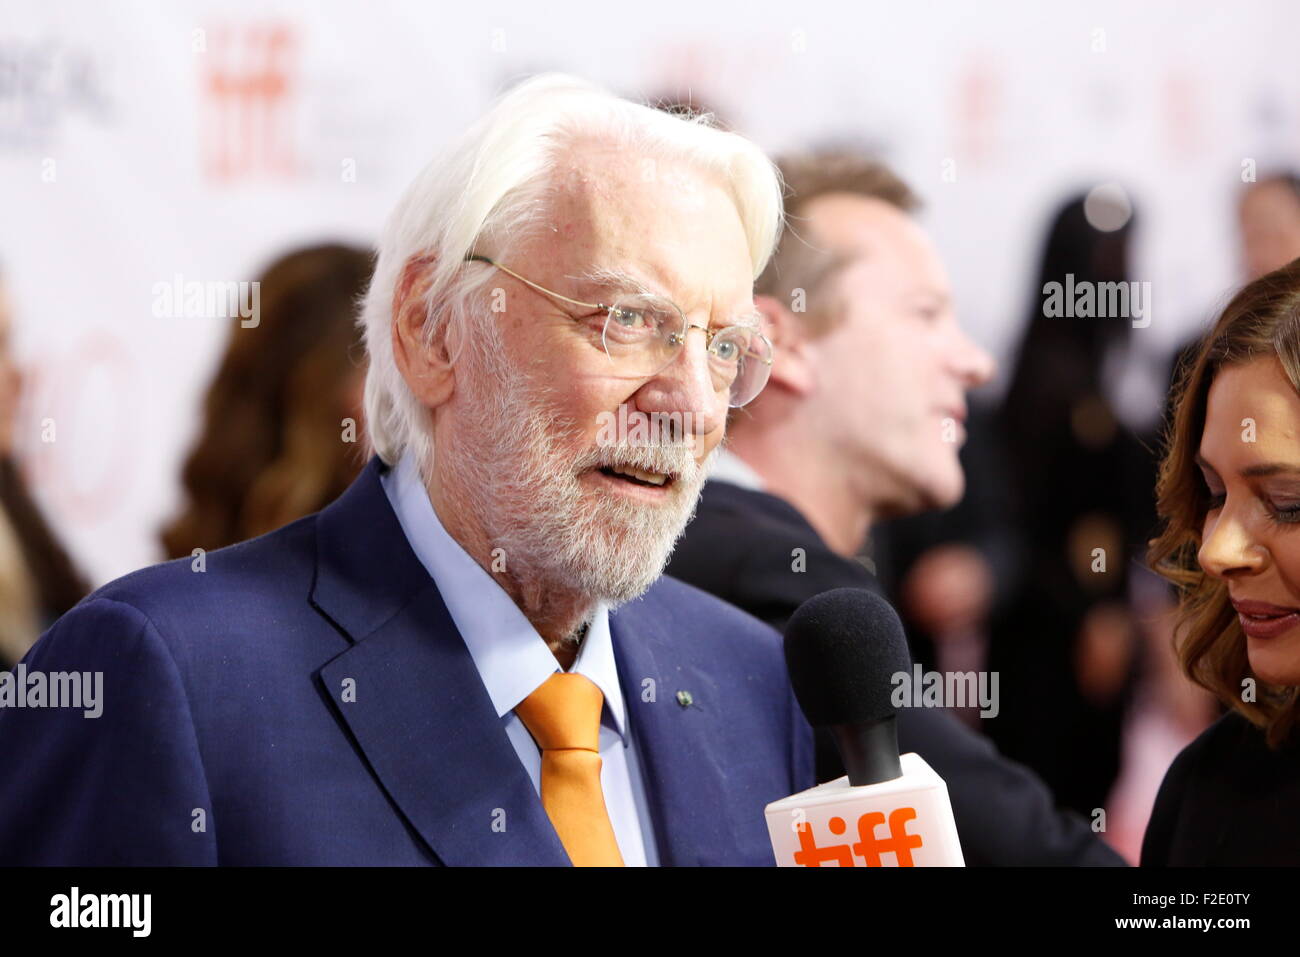 Actors Donald Sutherland (l) and Kiefer Sutherland attend the premiere of Forsaken during the 40th Toronto International Film Festival, TIFF, at Roy Thomson Hall in Toronto, Canada, on 15 September 2015. Photo: Hubert Boesl /dpa - NO WIRE SERVICE - Stock Photo